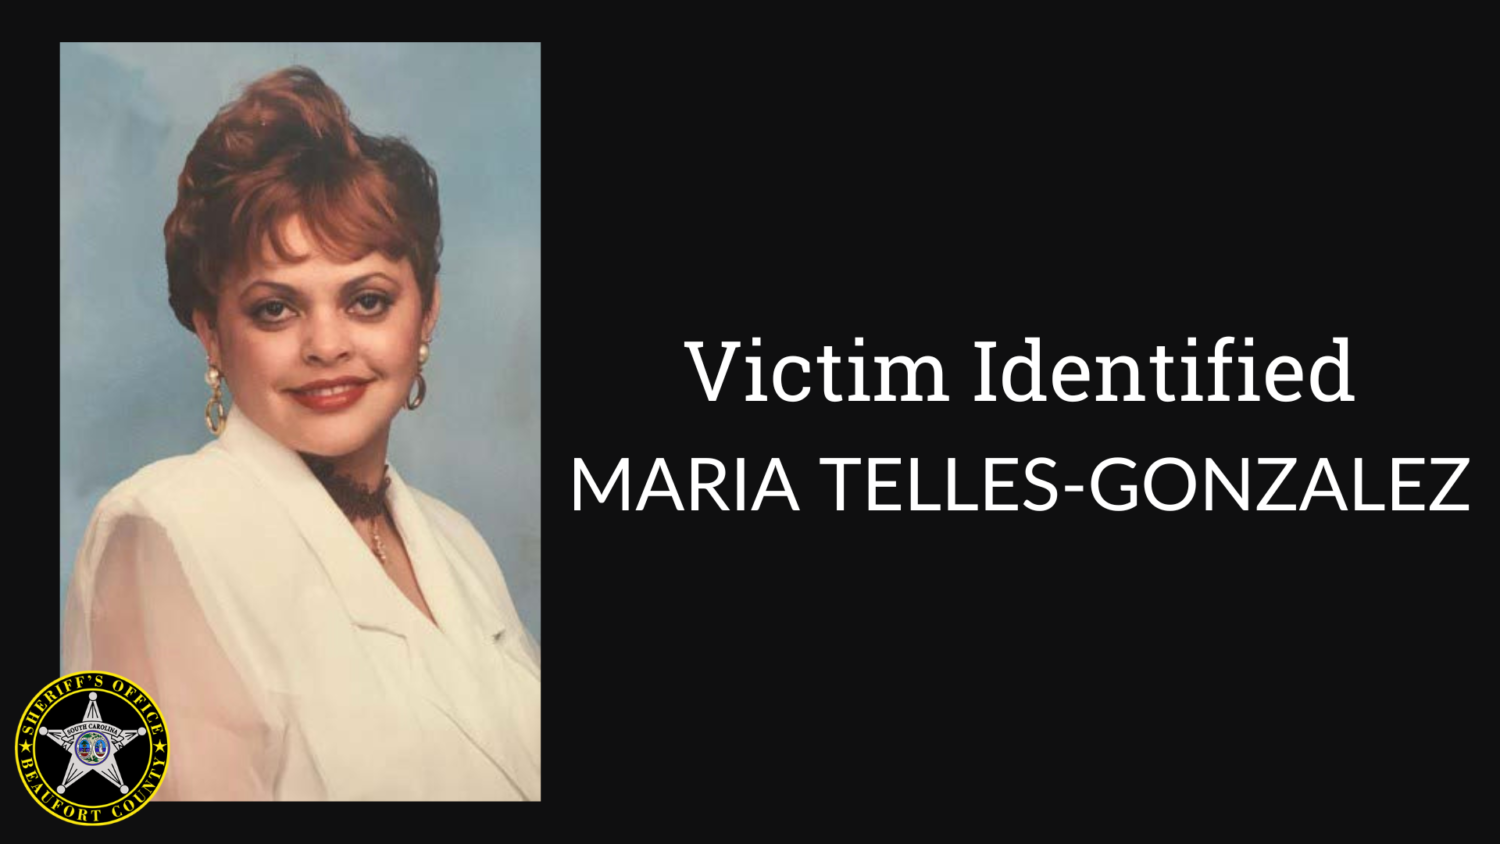 Forensic science and genealogy help identify 1995 murder victim as a Florida woman • Cold Case